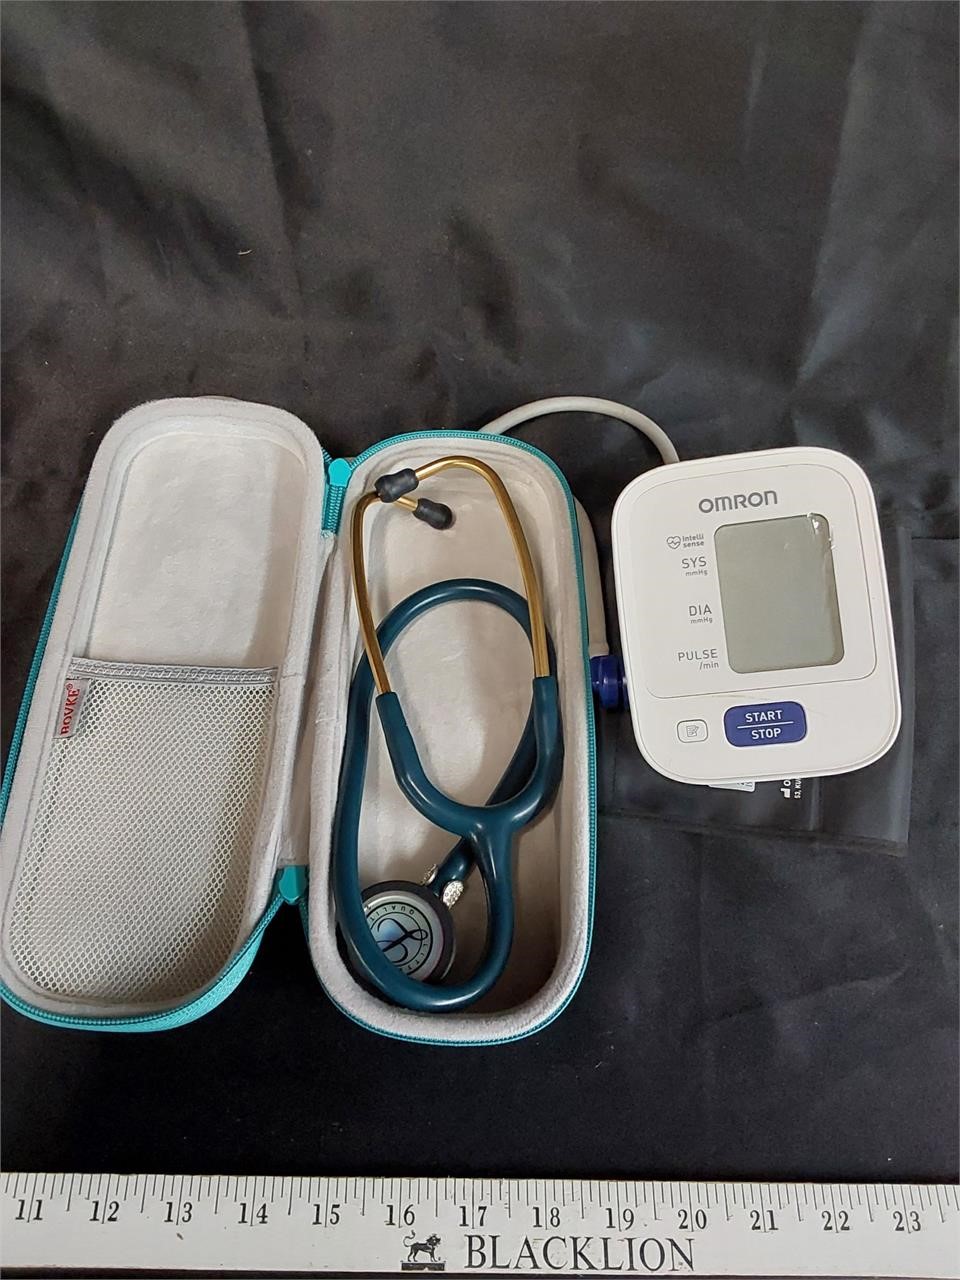 Blood pressure and stethoscope